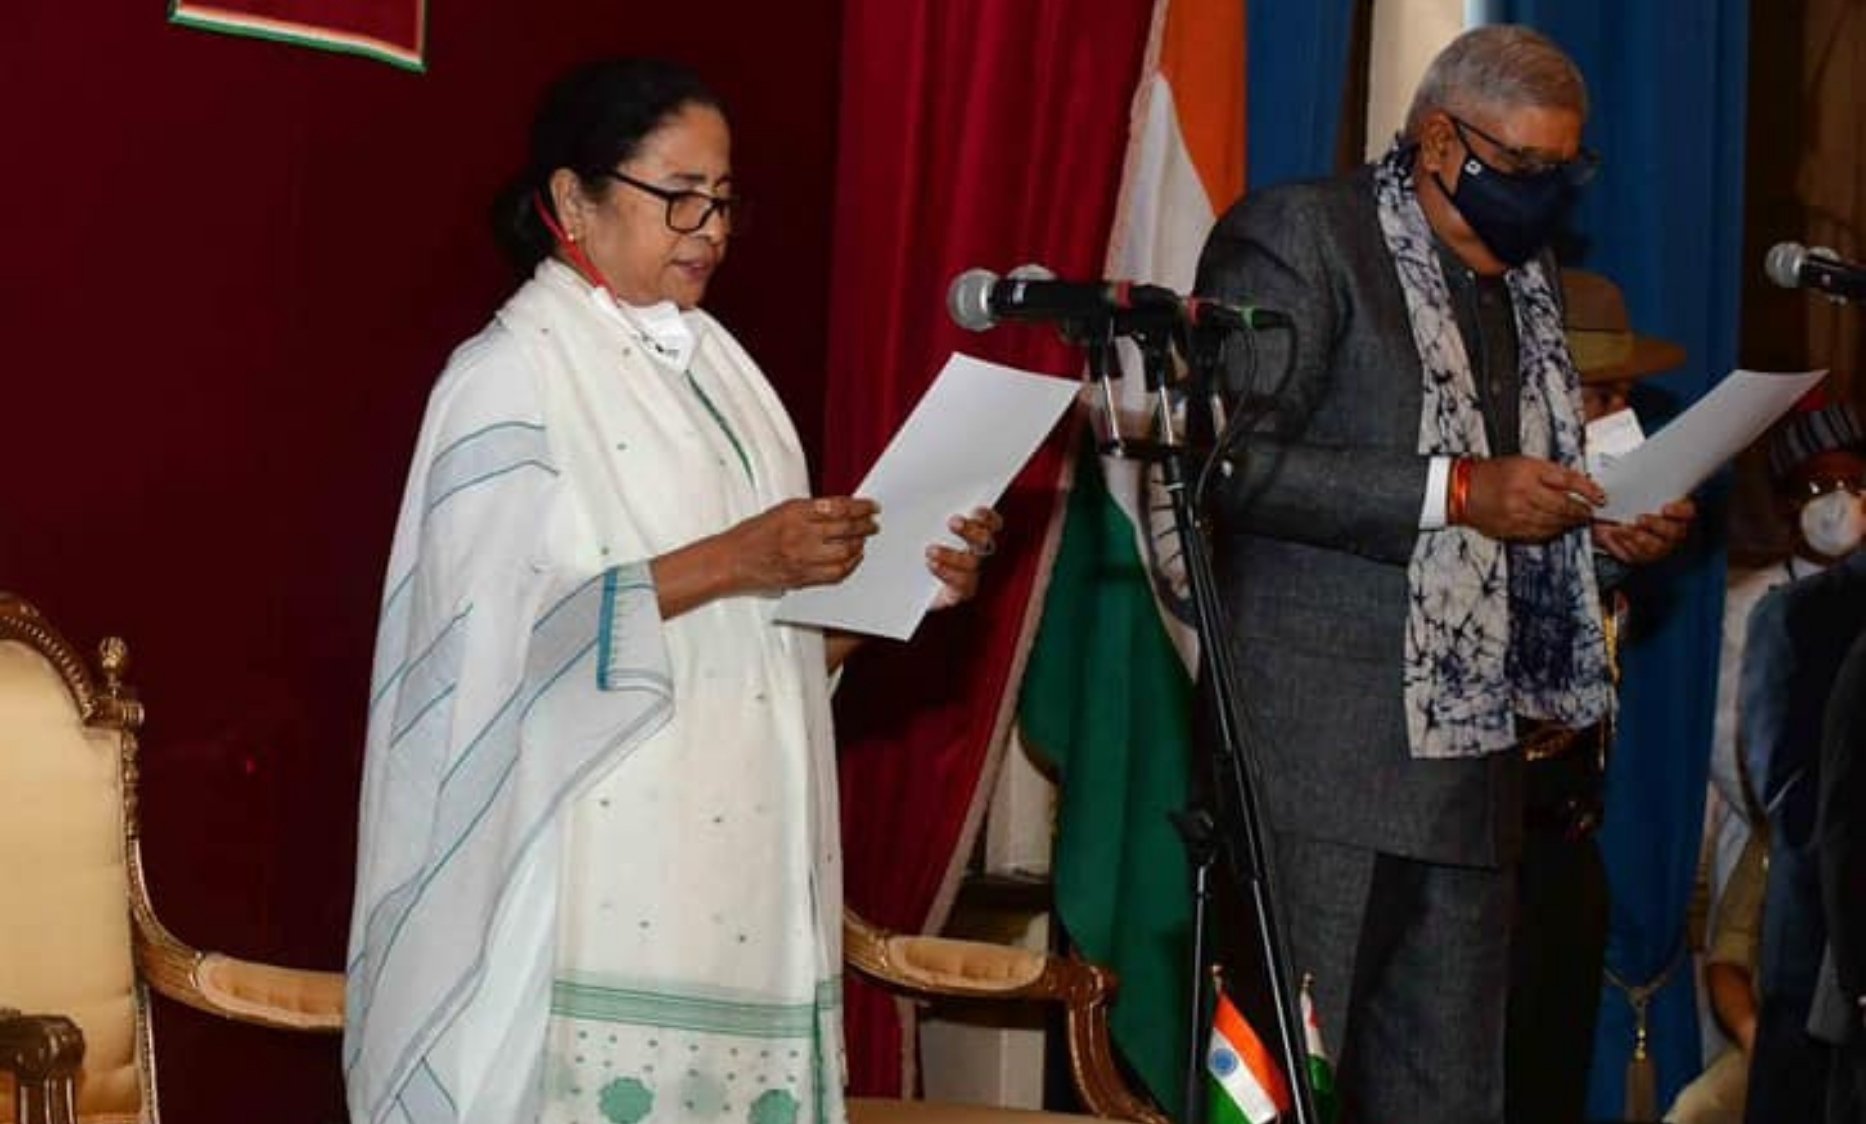 Mamata Banerjee takes oath as West Bengal CM for the third consecutive term - Digpu News